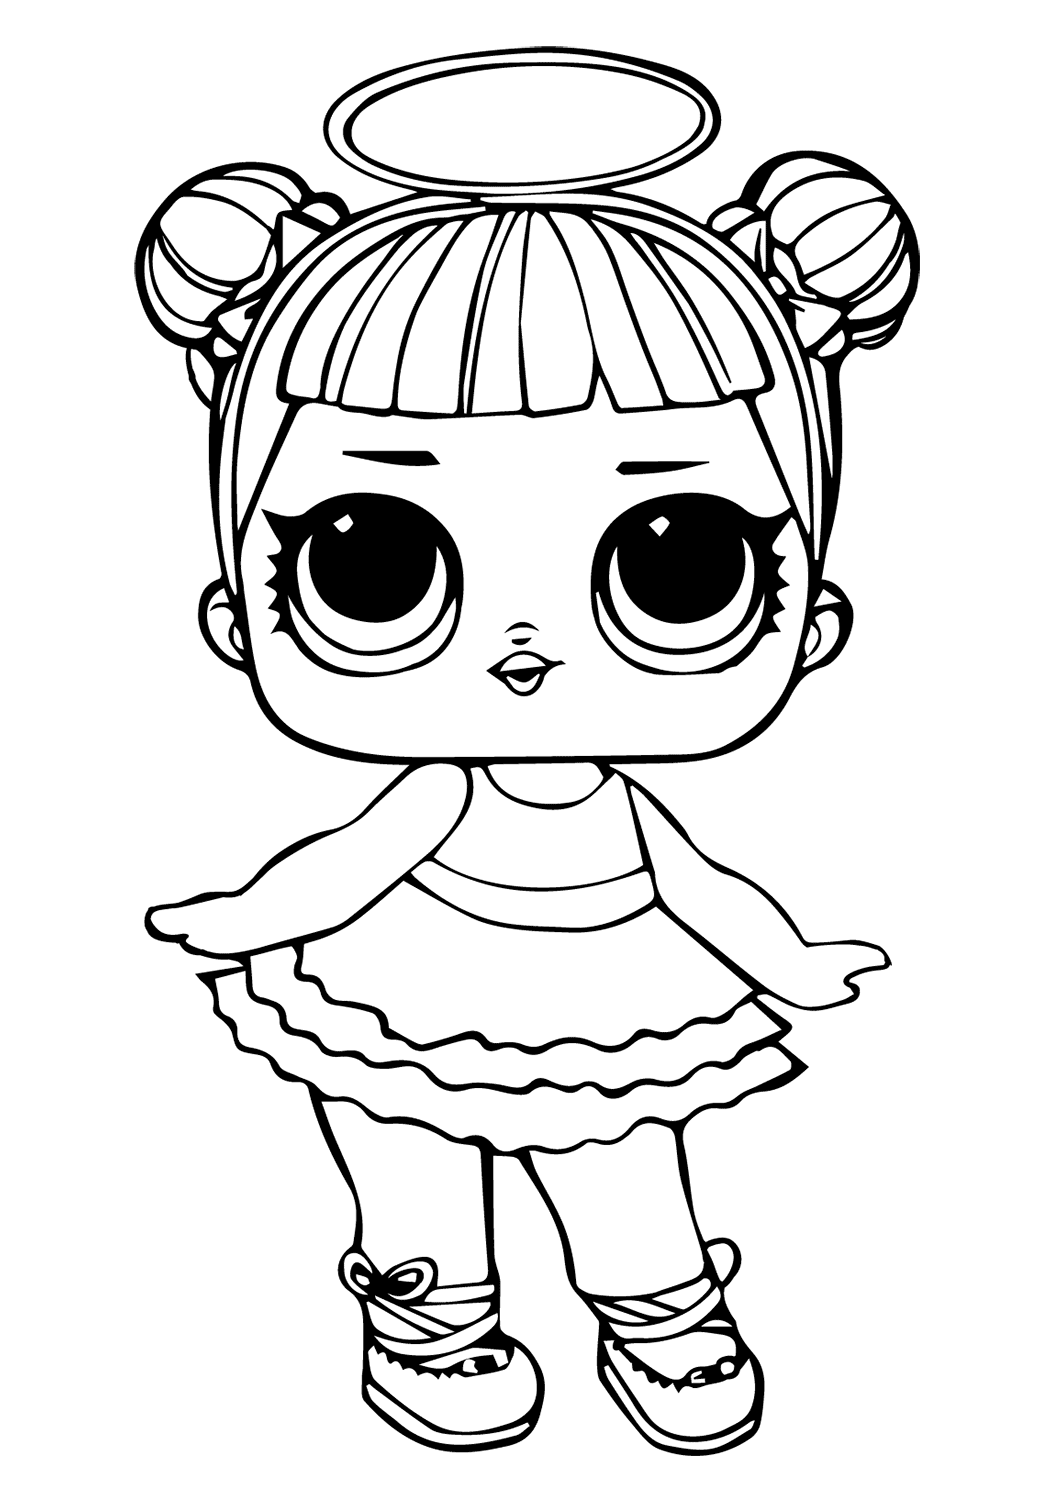 LOL Surprise Dolls Coloring Pages   Free Printable Coloring Page